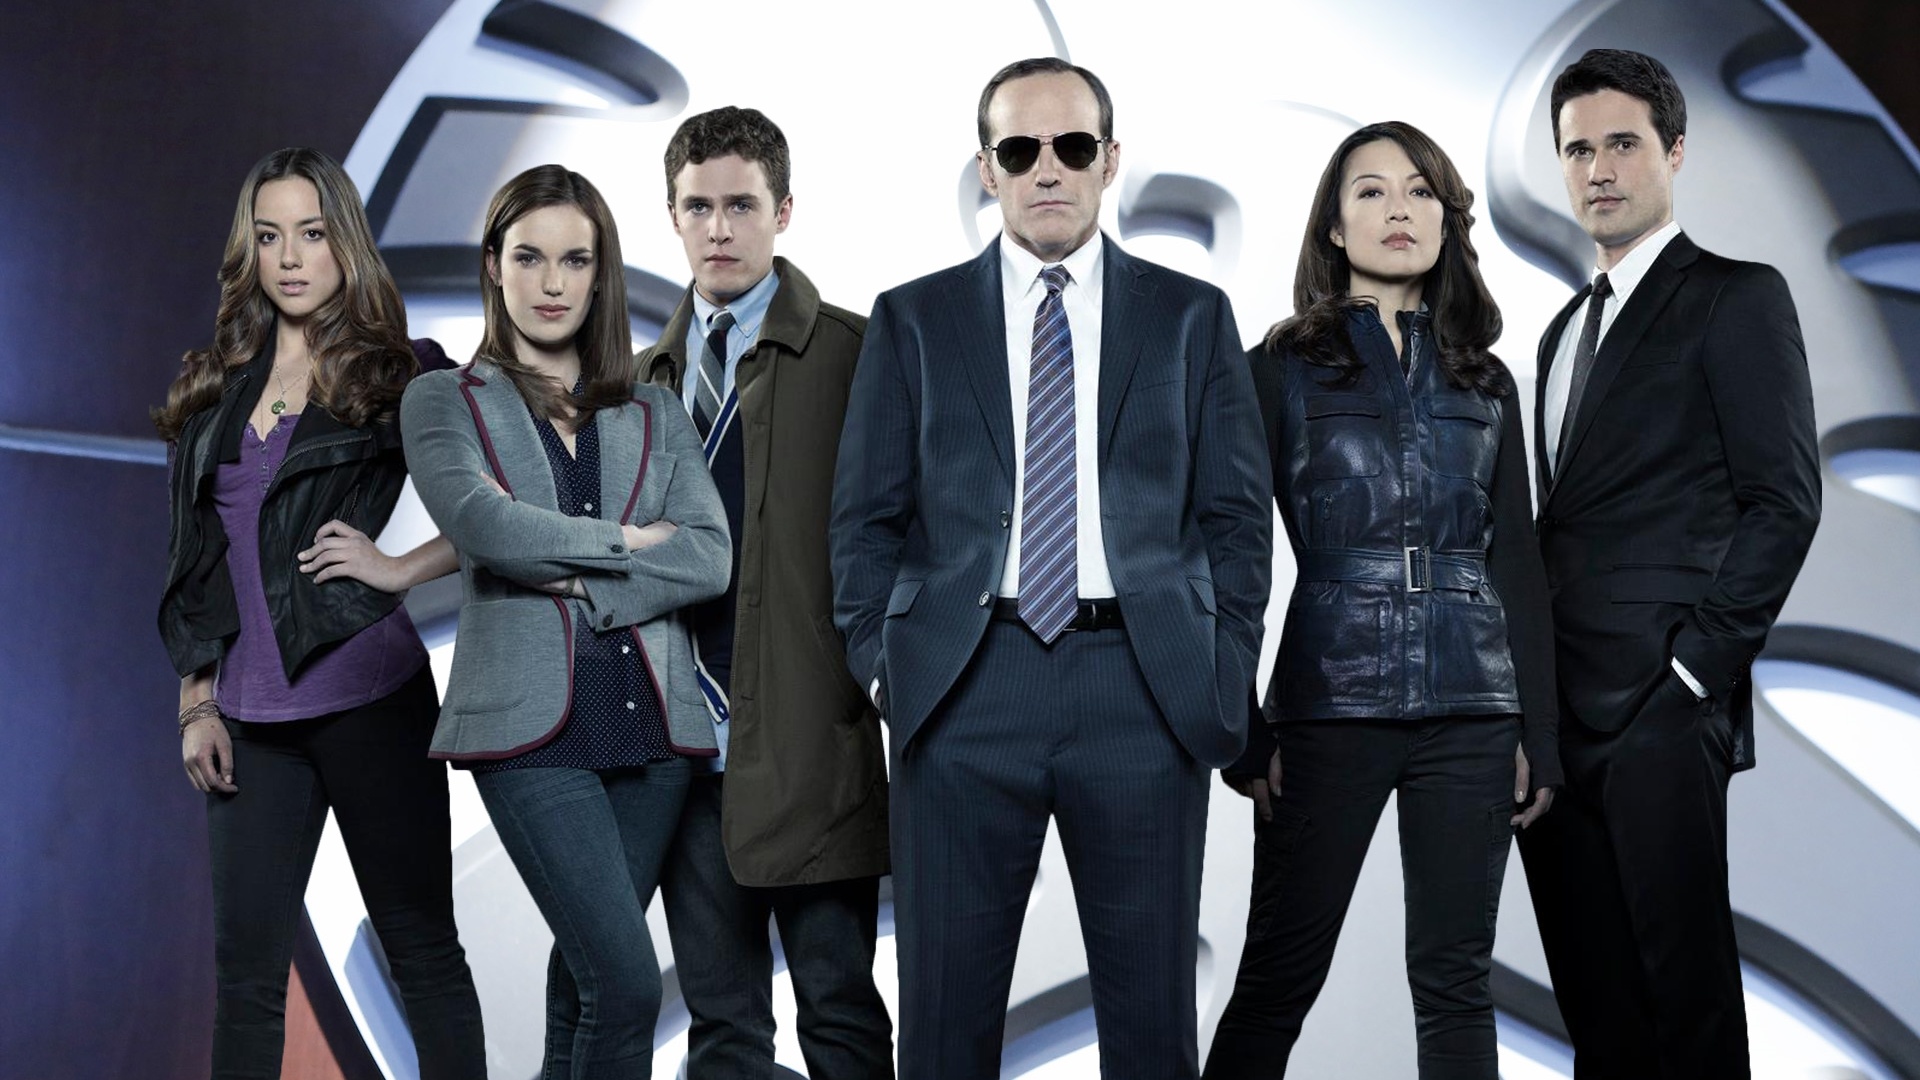 Agents of S.H.I.E.L.D., Marvel heroes, Intriguing plot, Action-packed, 1920x1080 Full HD Desktop